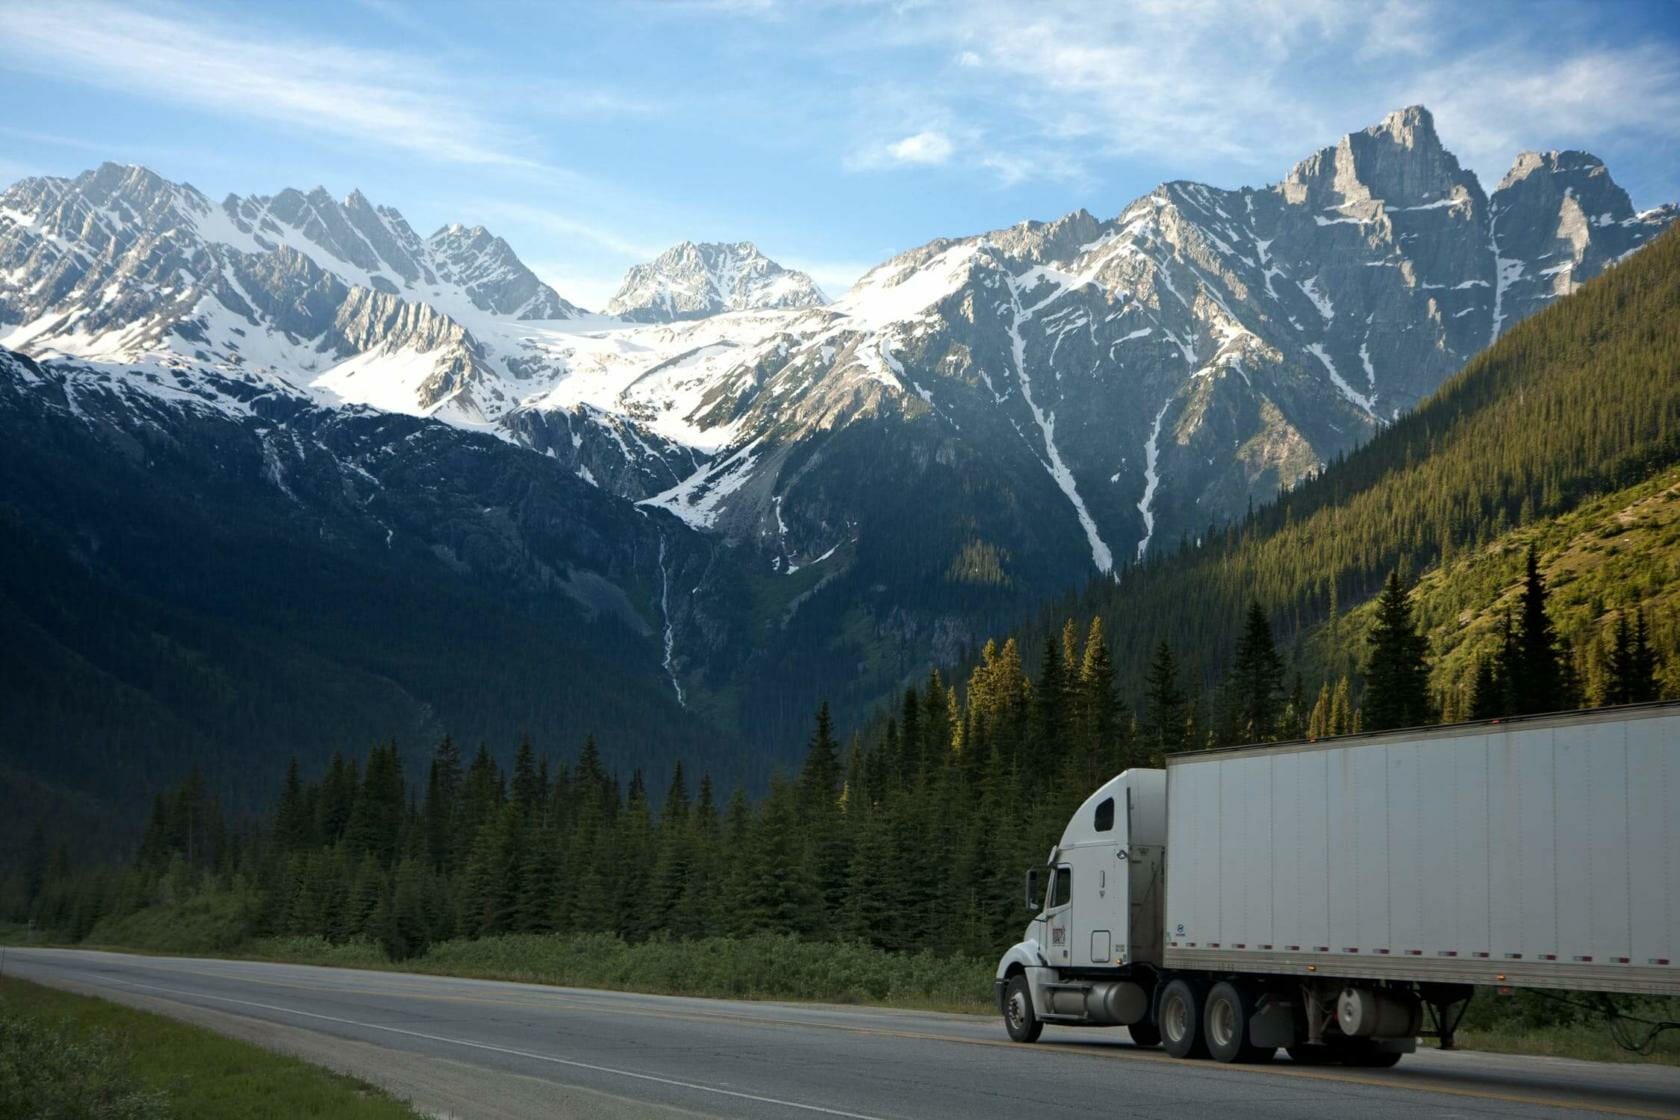 18-wheeler traveling with mountain and forests in background